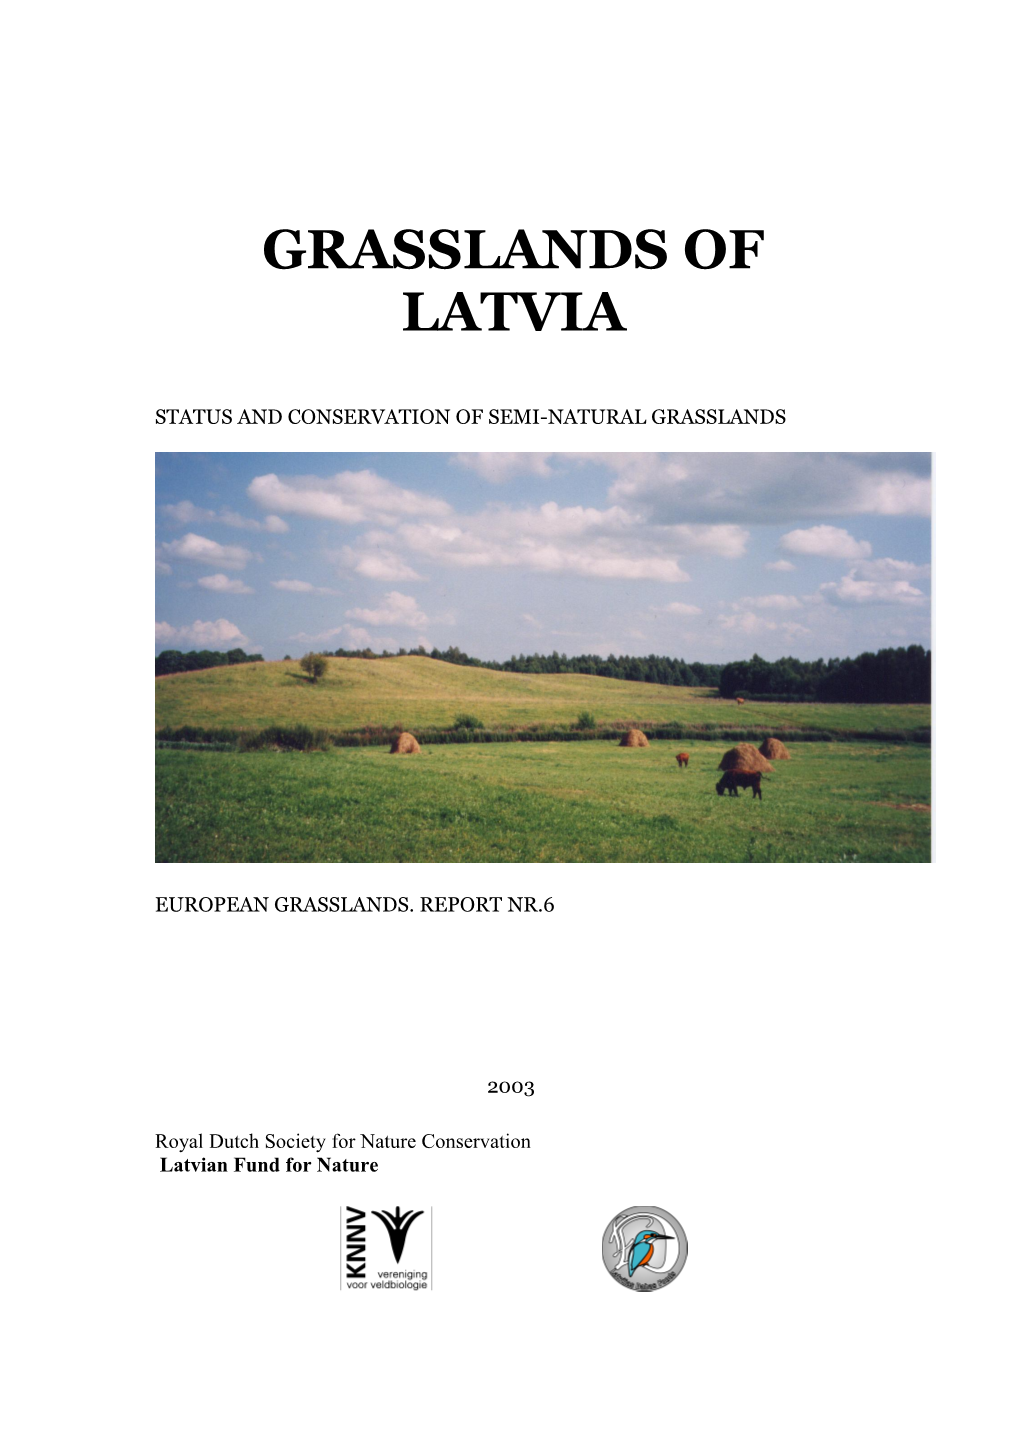 Meadows and Pasture Cover 33 % of the Agricultural Area